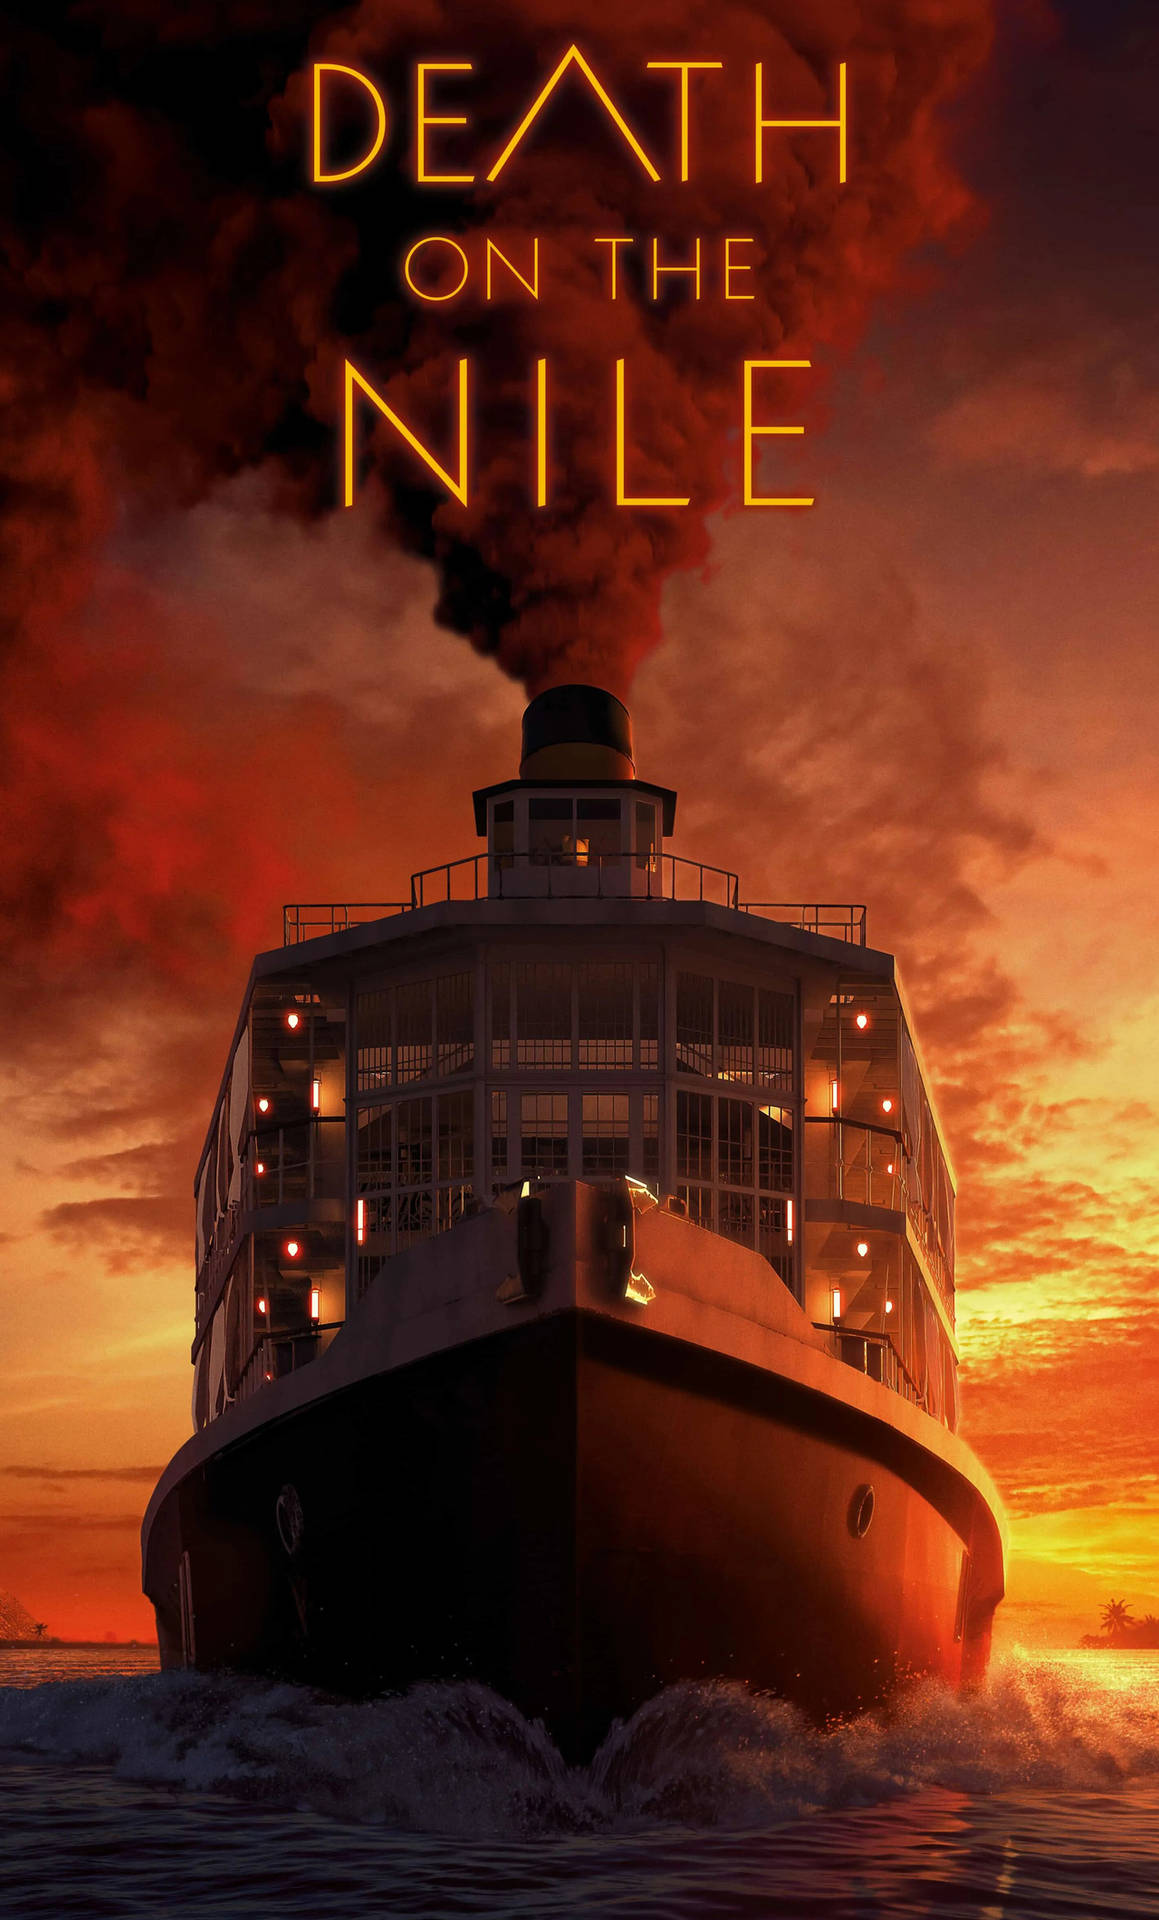 Death On The Nile Film Poster Wallpaper